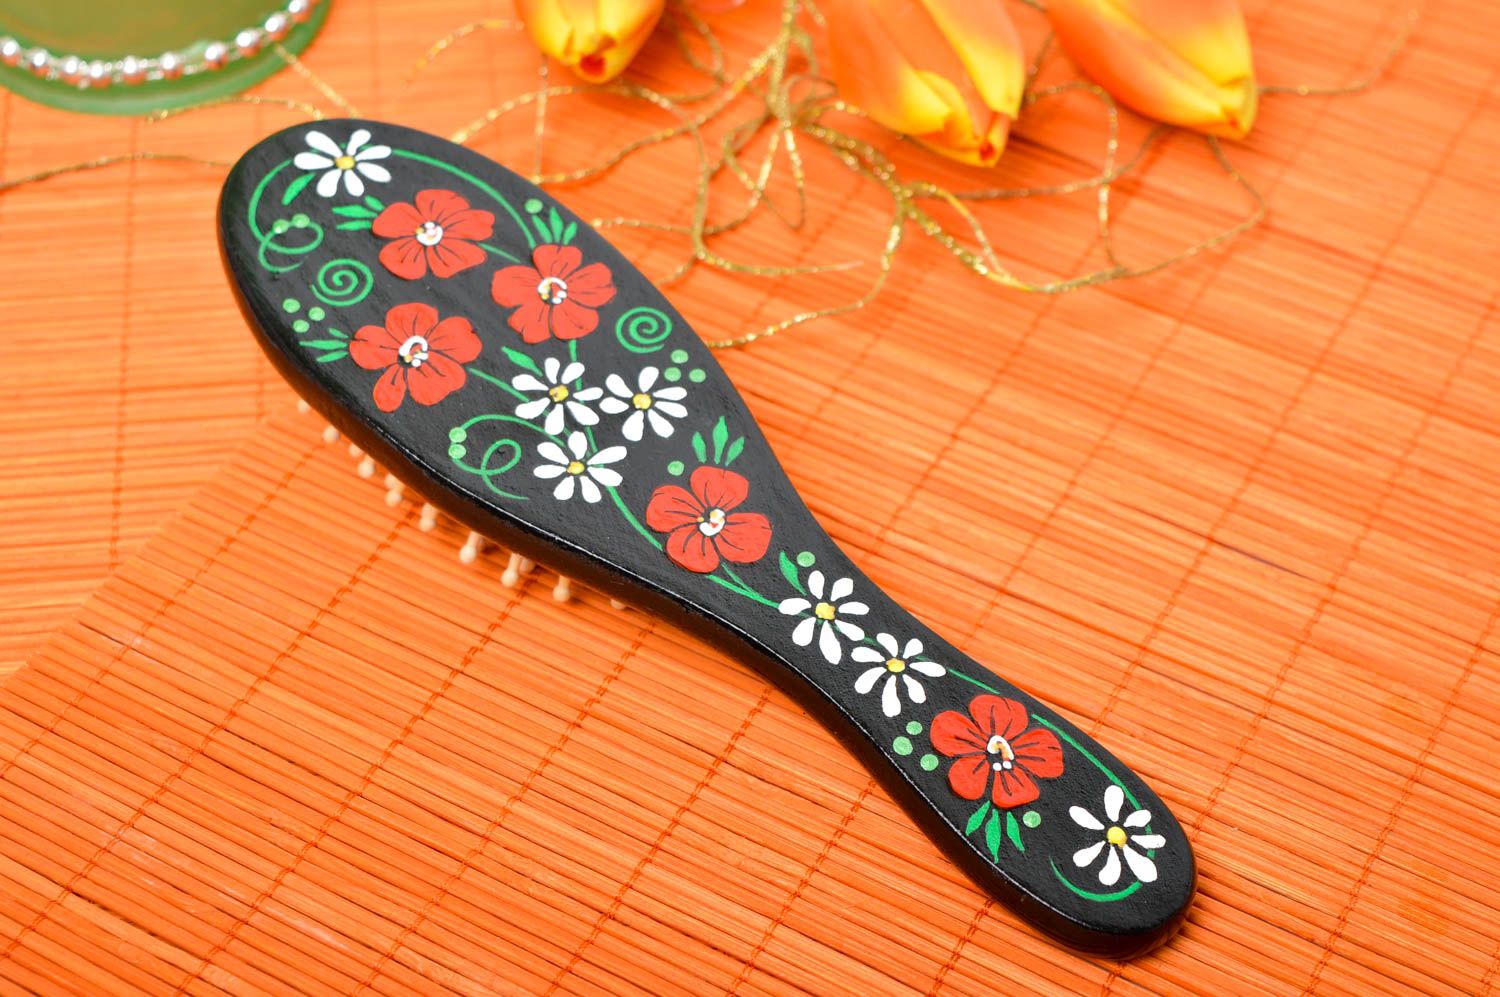 Unusual handmade wooden hairbrush long hair ideas wood craft gifts for her photo 1